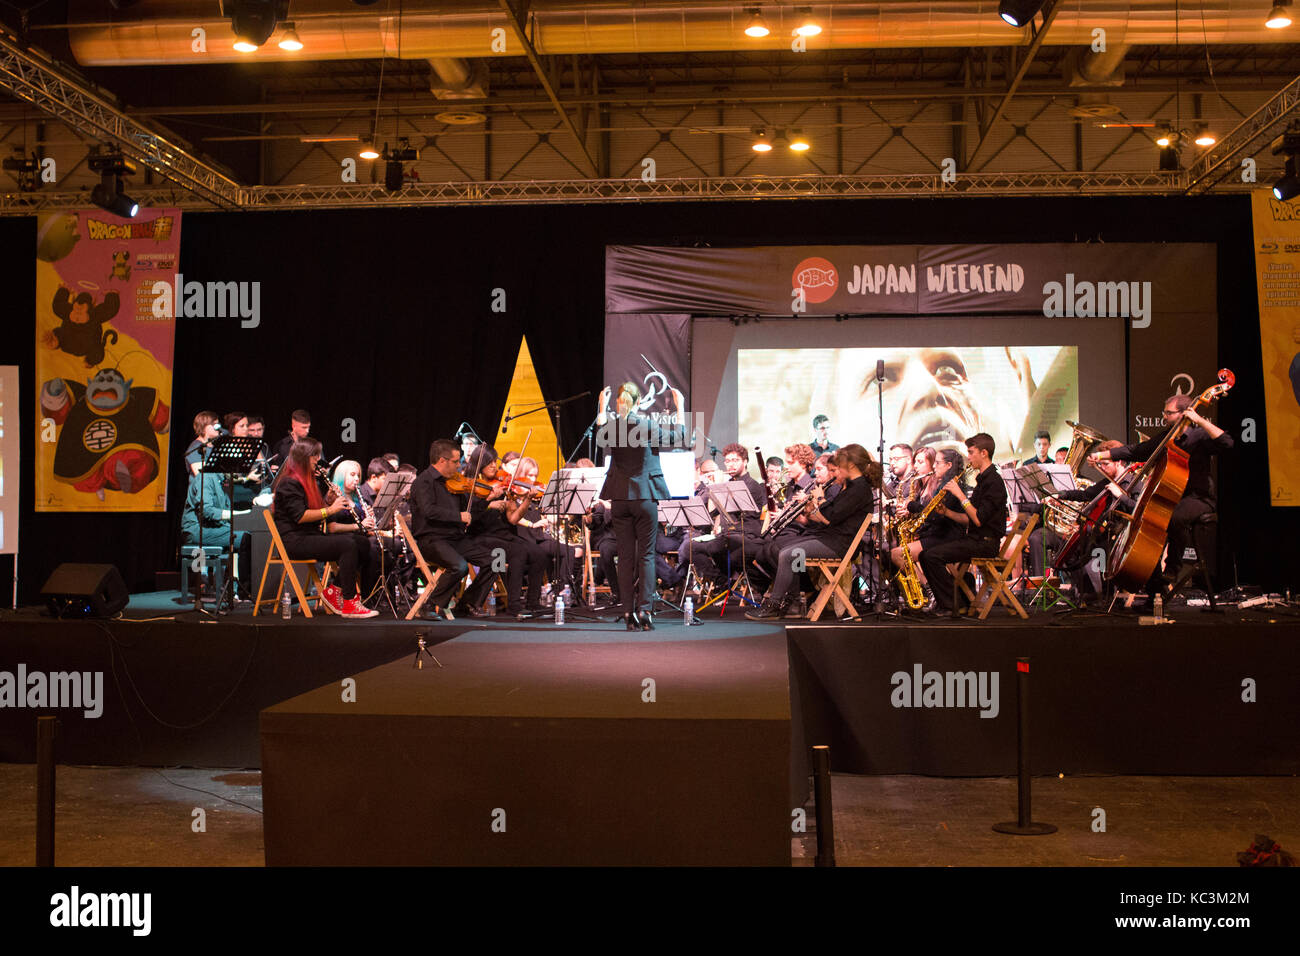 Madrid, Spain. 01st Oct, 2017. The Japan Weekend band playing Metal Gear Solid themes. Thousands of people comes to the September Japan Weekend, whit concerts, activities and videogames. Credit: Jorge Gonzalez/Pacific Press/Alamy Live News Stock Photo